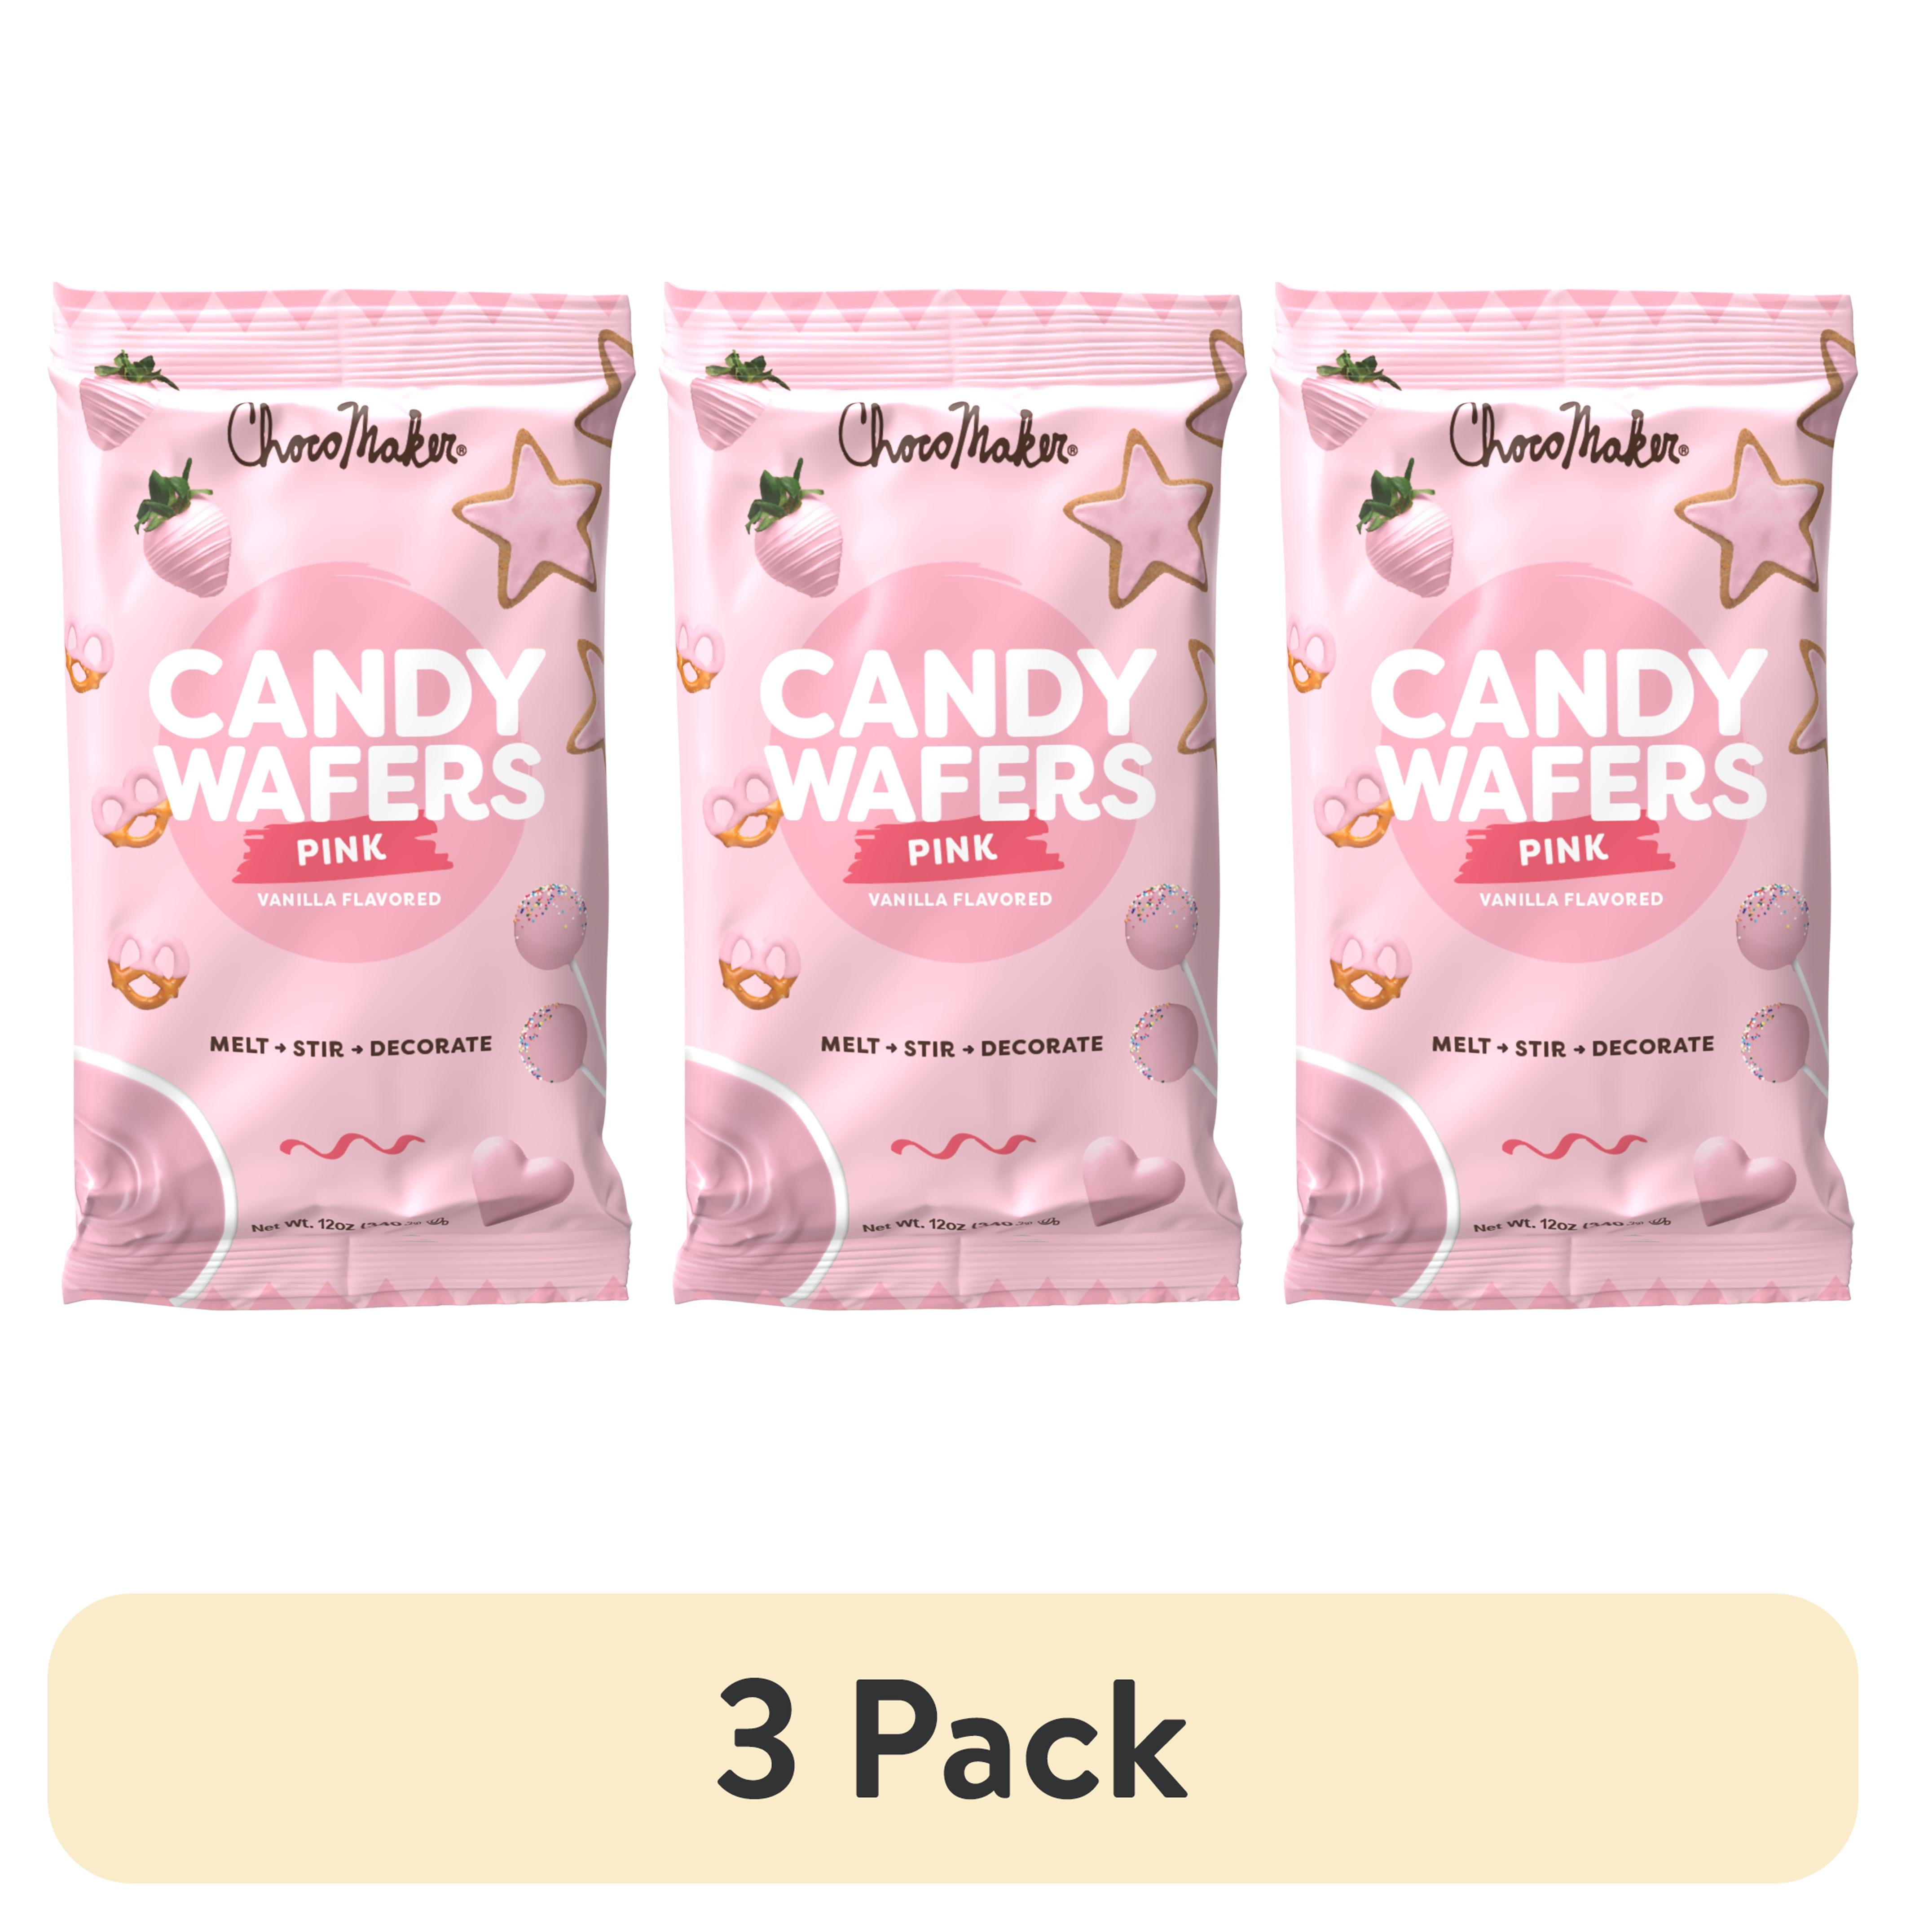 ChocoMaker Pink Vanilla Flavored Candy Wafers 12oz 